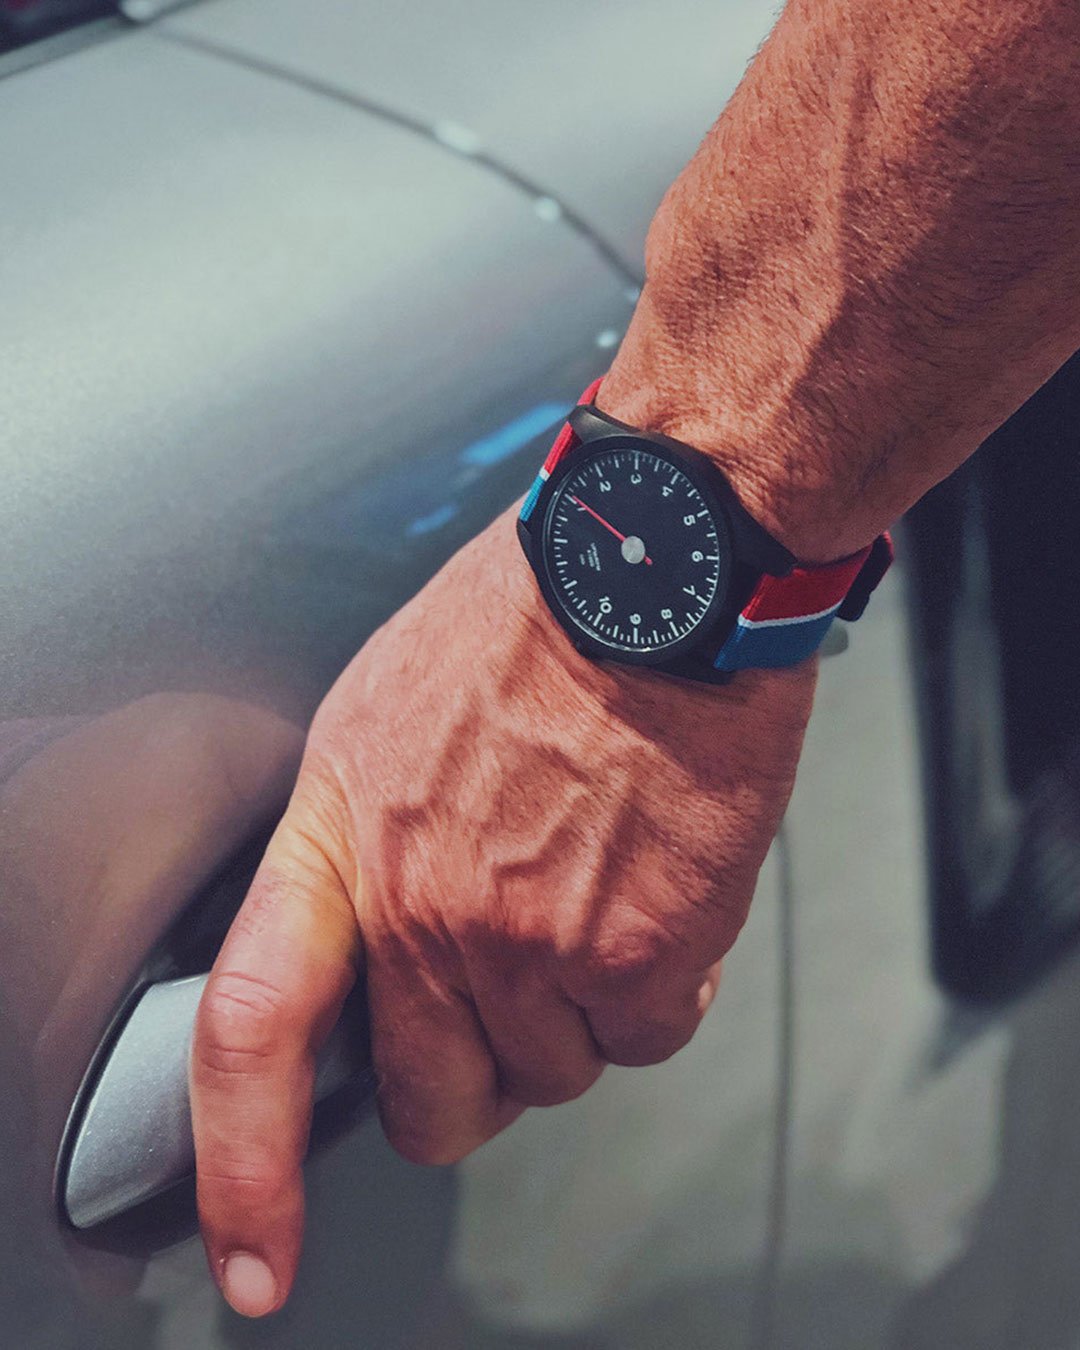 A person holding a car door handle wearing an GRD watch